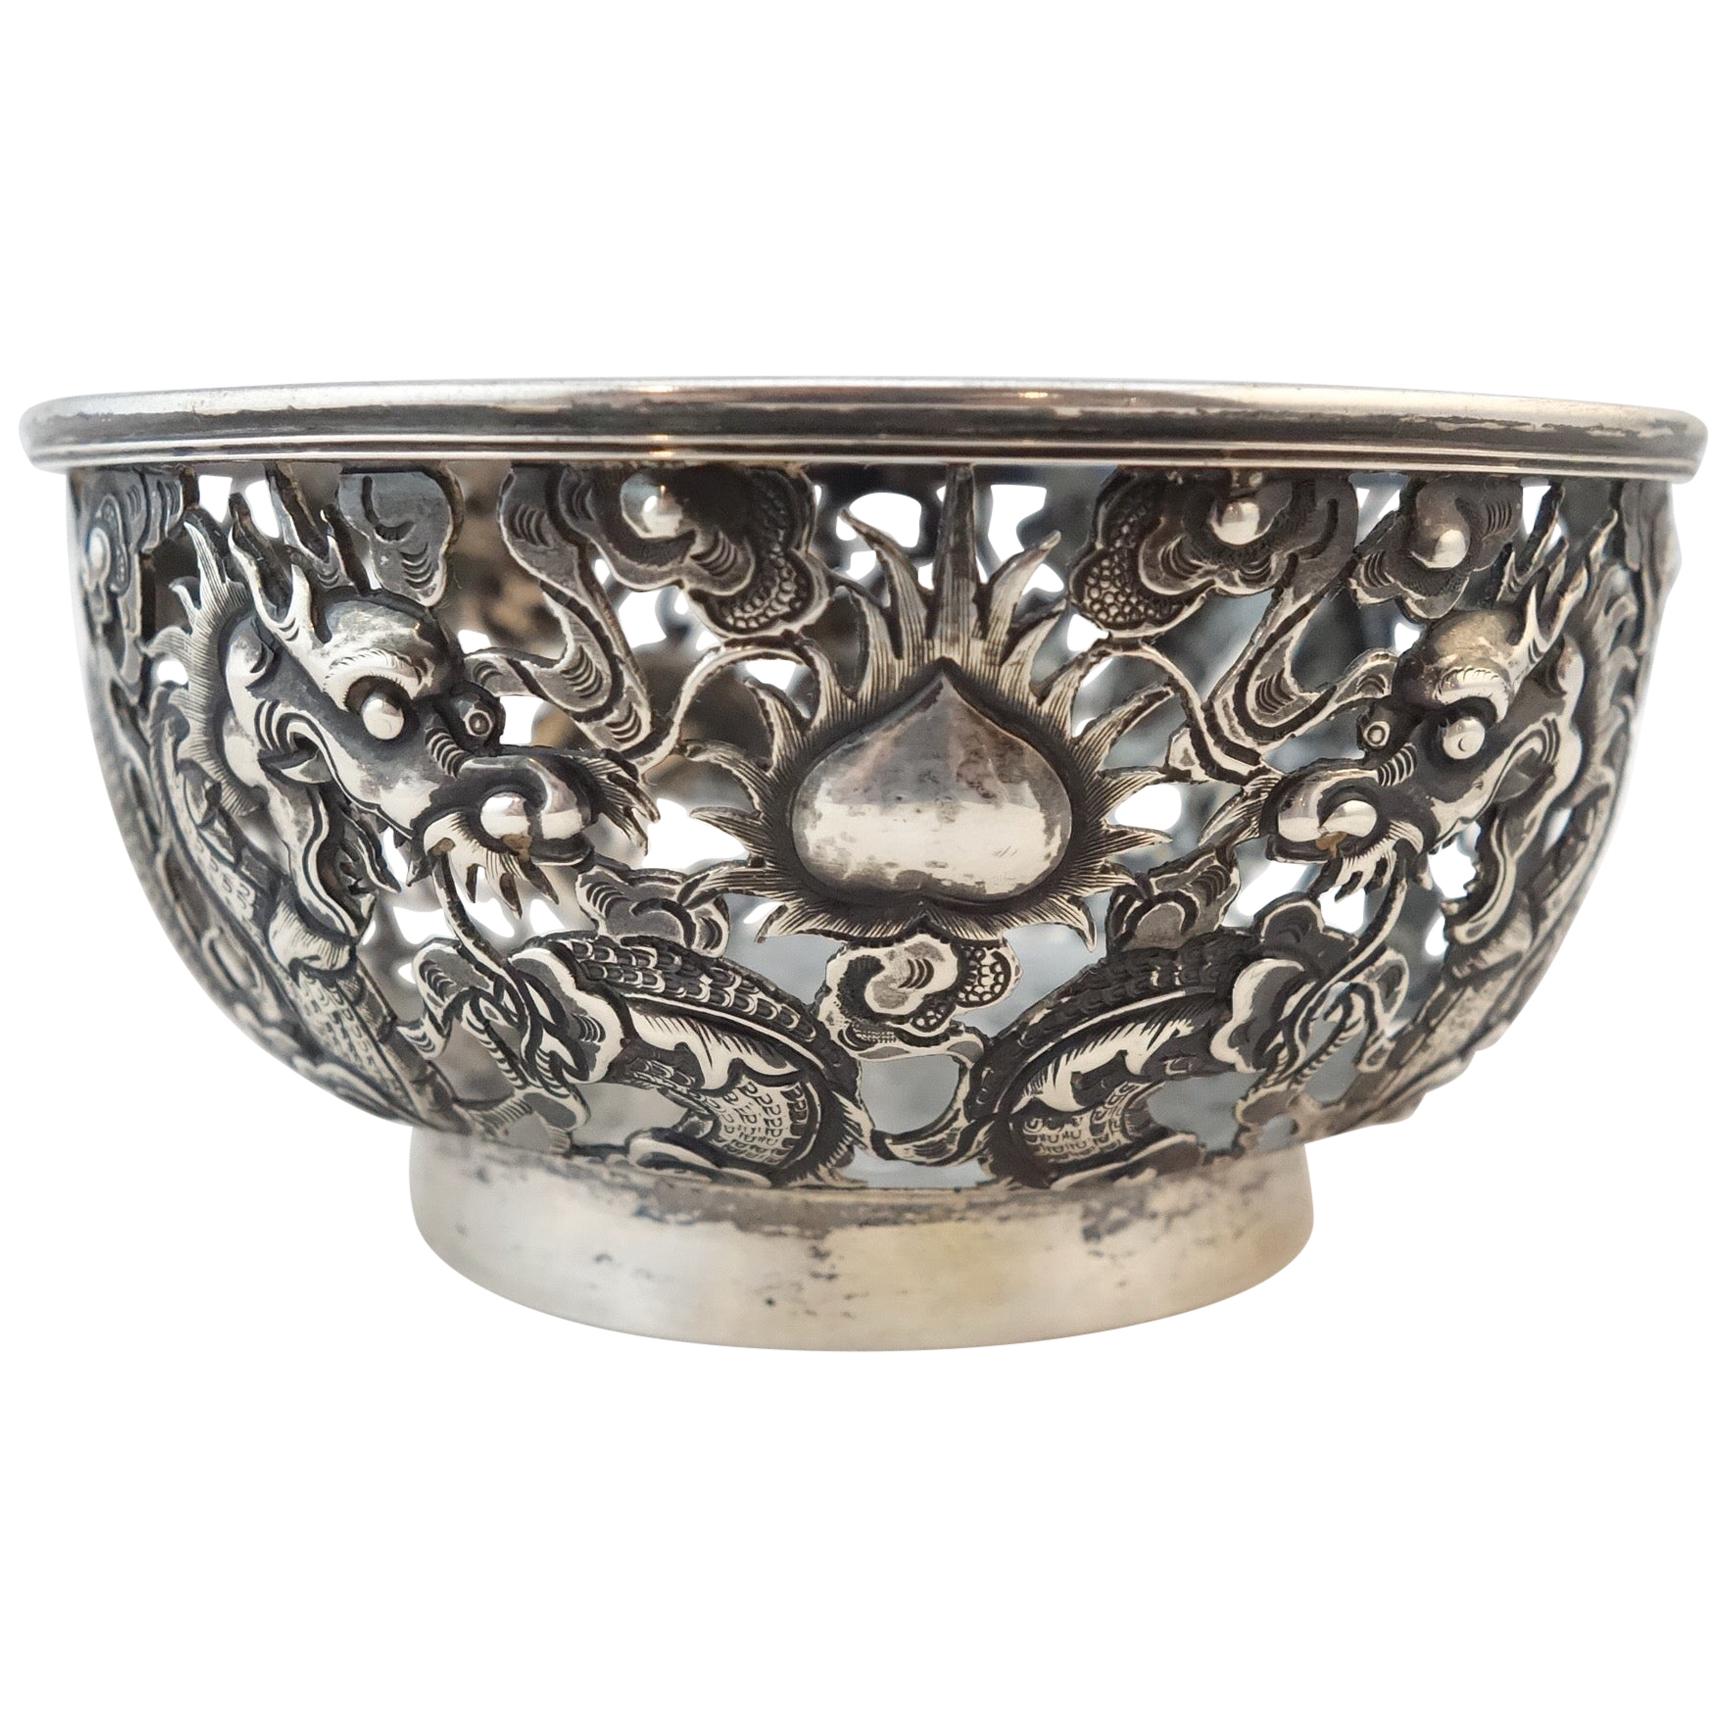 Chinese Export Silver Openwork Bowl by Wan Hing & Co, Hong Kong, 1890 For Sale